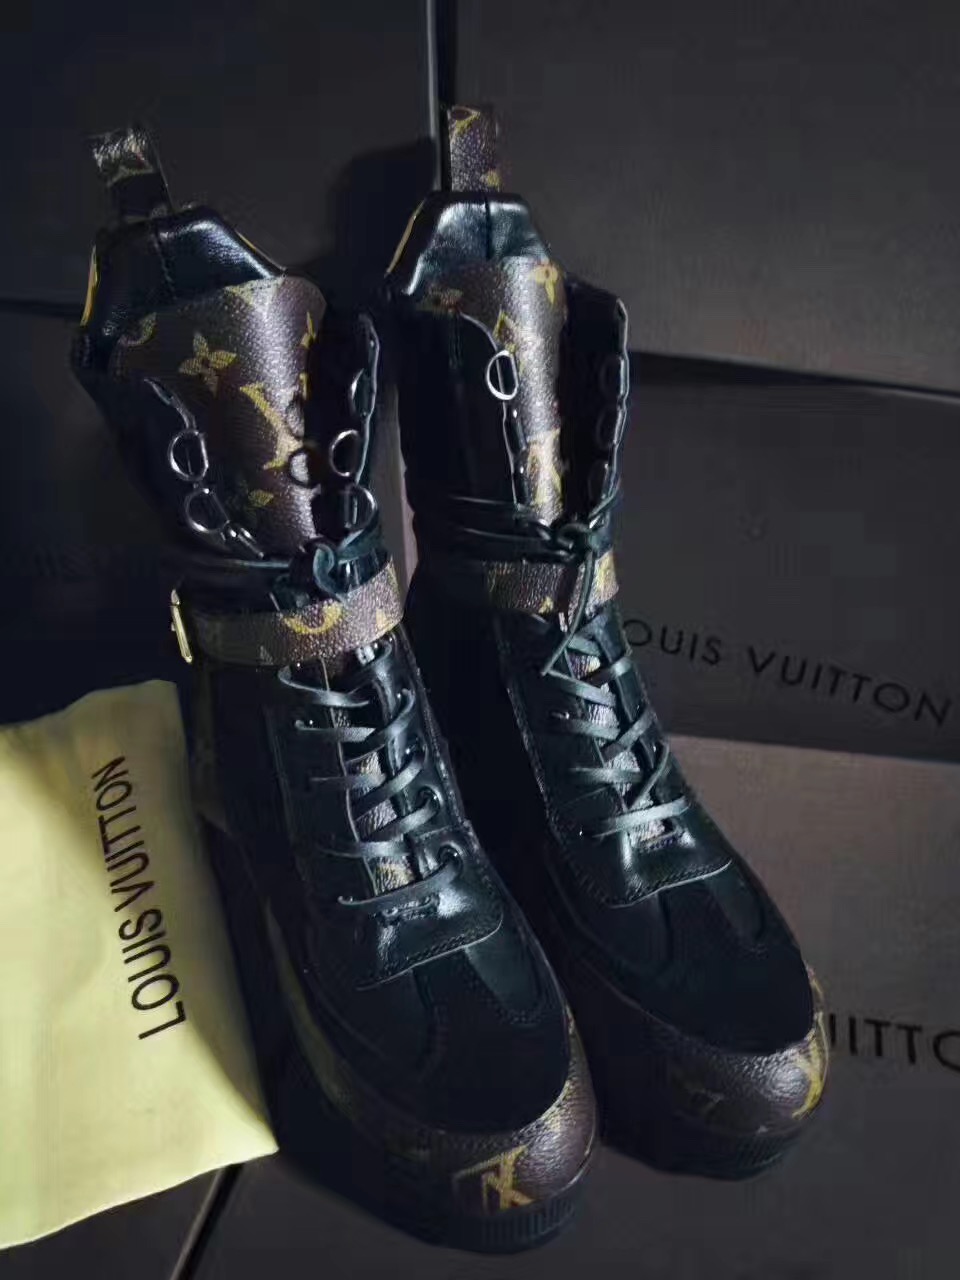 Louis Vuitton Black Shearling Winter Boots 862975 – Bagriculture